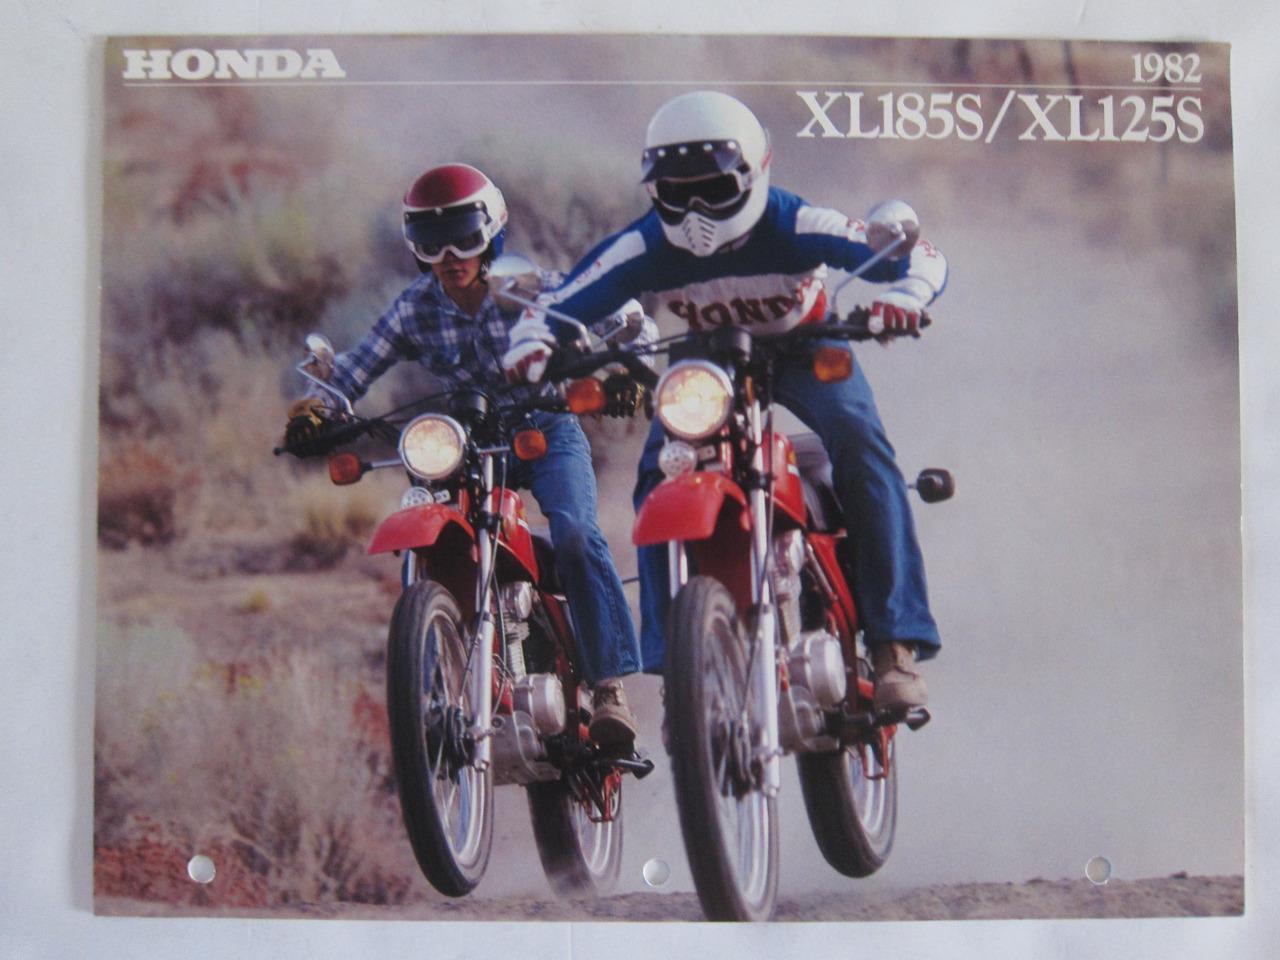 HONDA motorcycle brochure XL 185 S & 125 S Uncirculated high quality color 1982